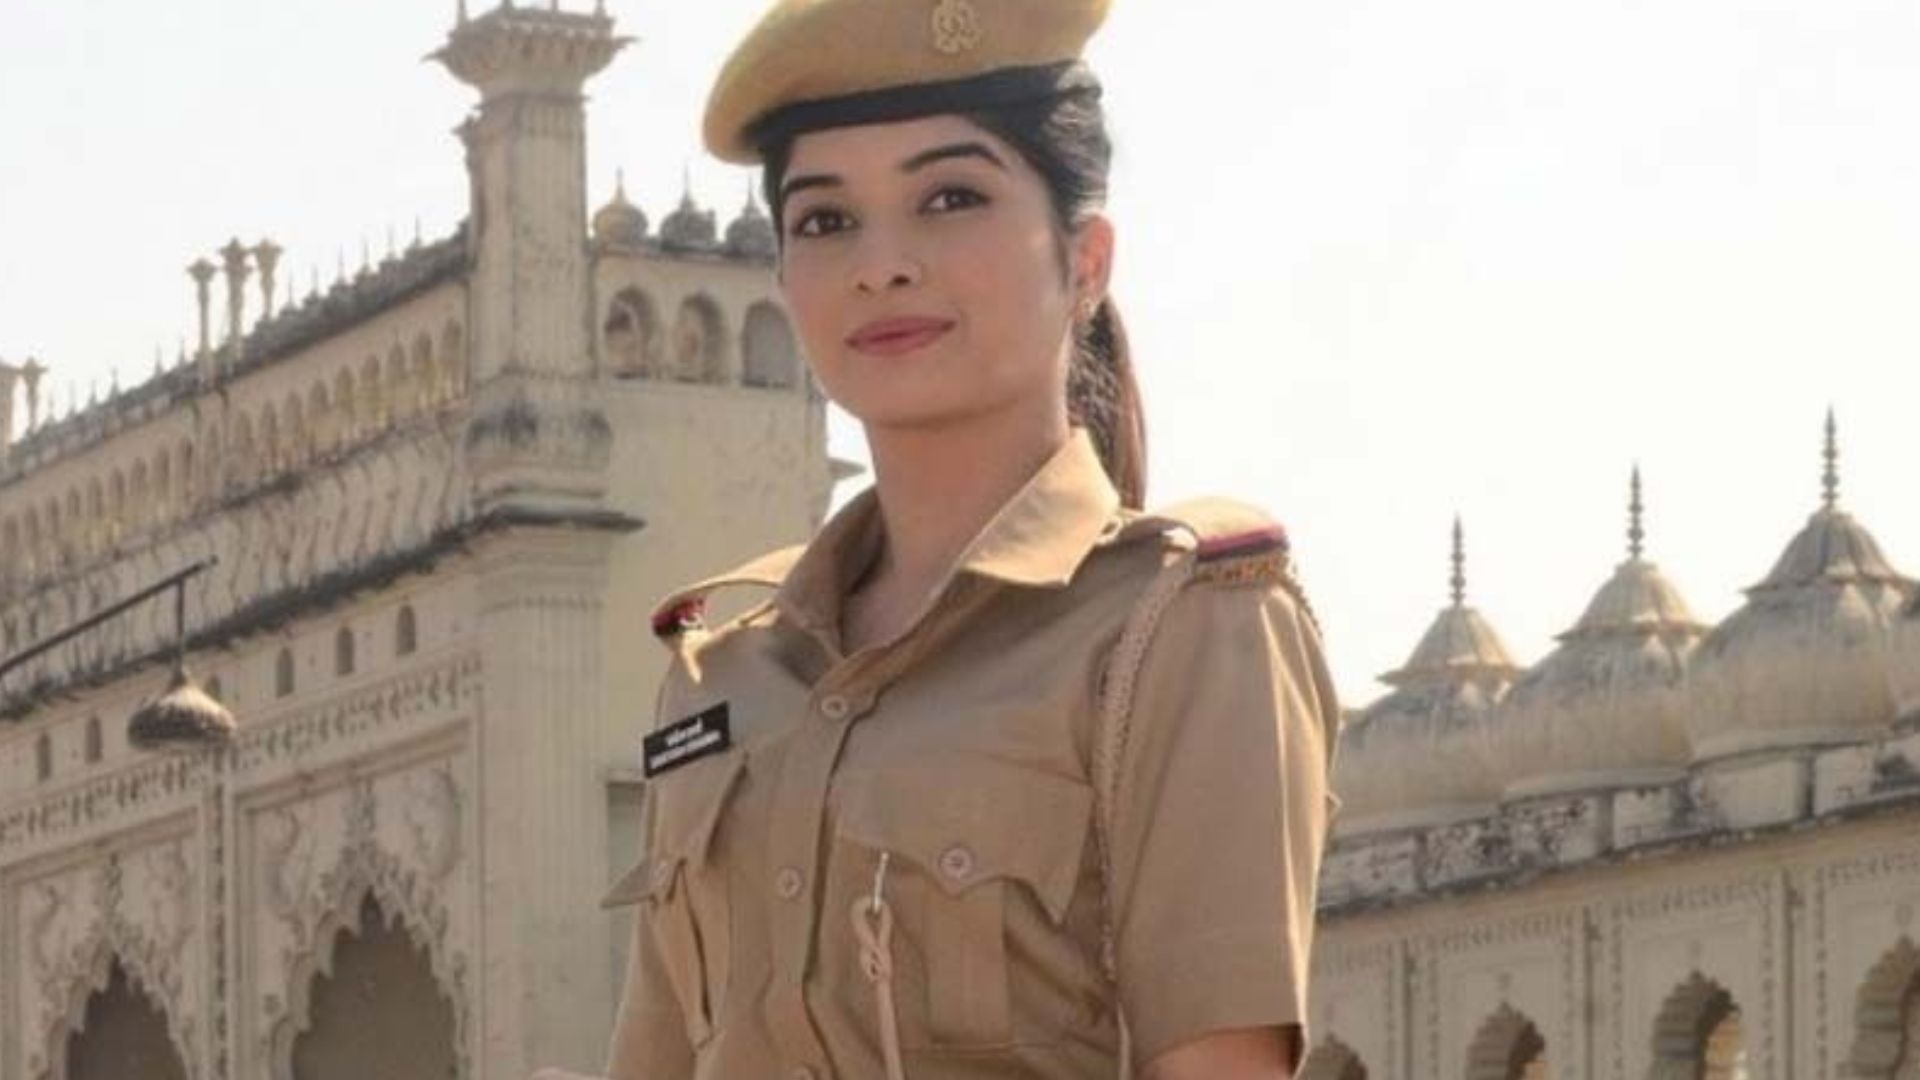 Bhavika Sharma In Police Uniform In Front Of Historical Buildings